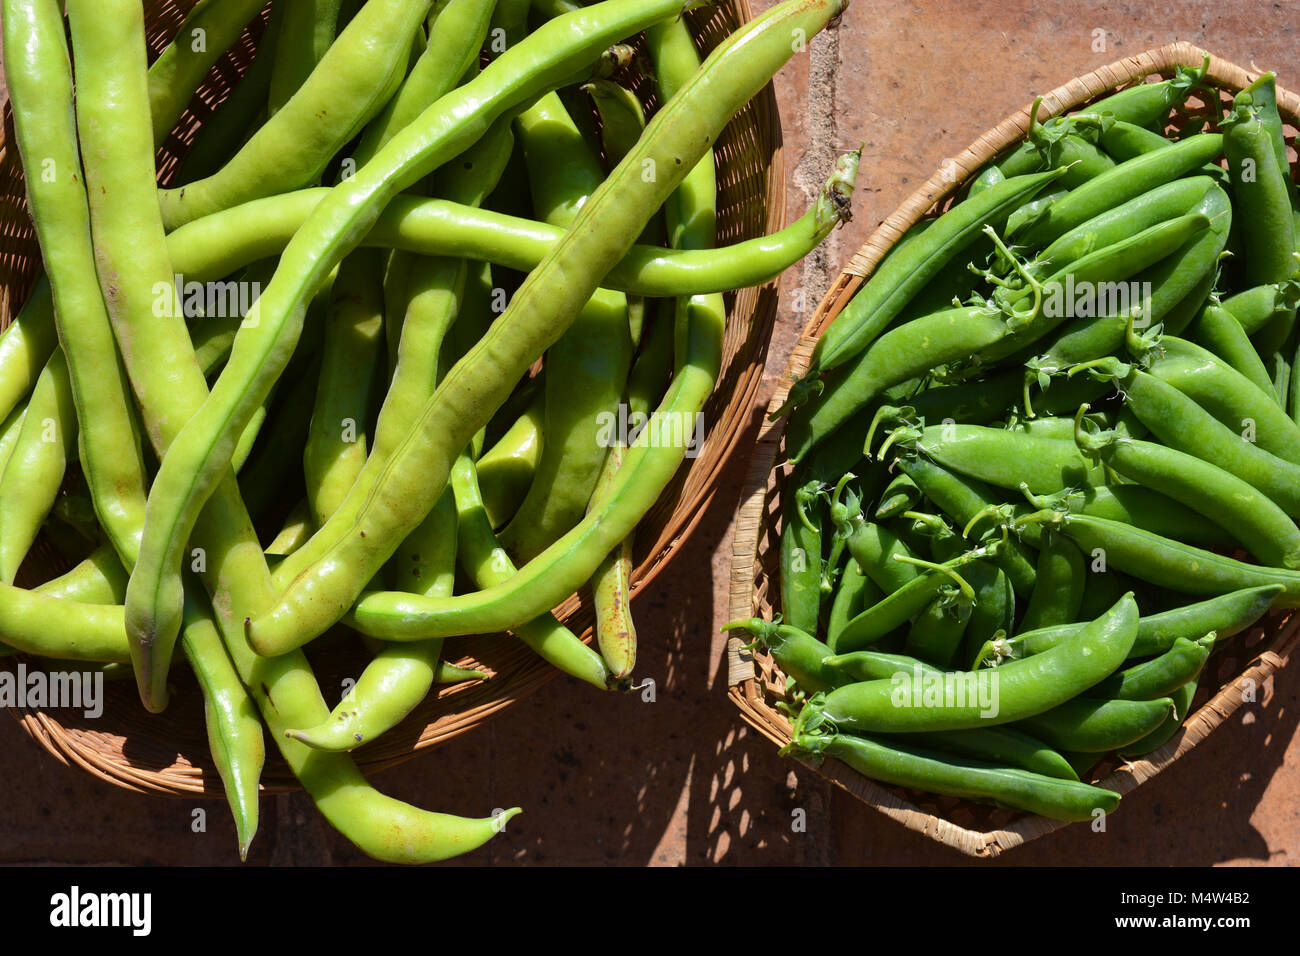 Freshly picked road beans and garden peas, still in their pods, in baskets. Stock Photo